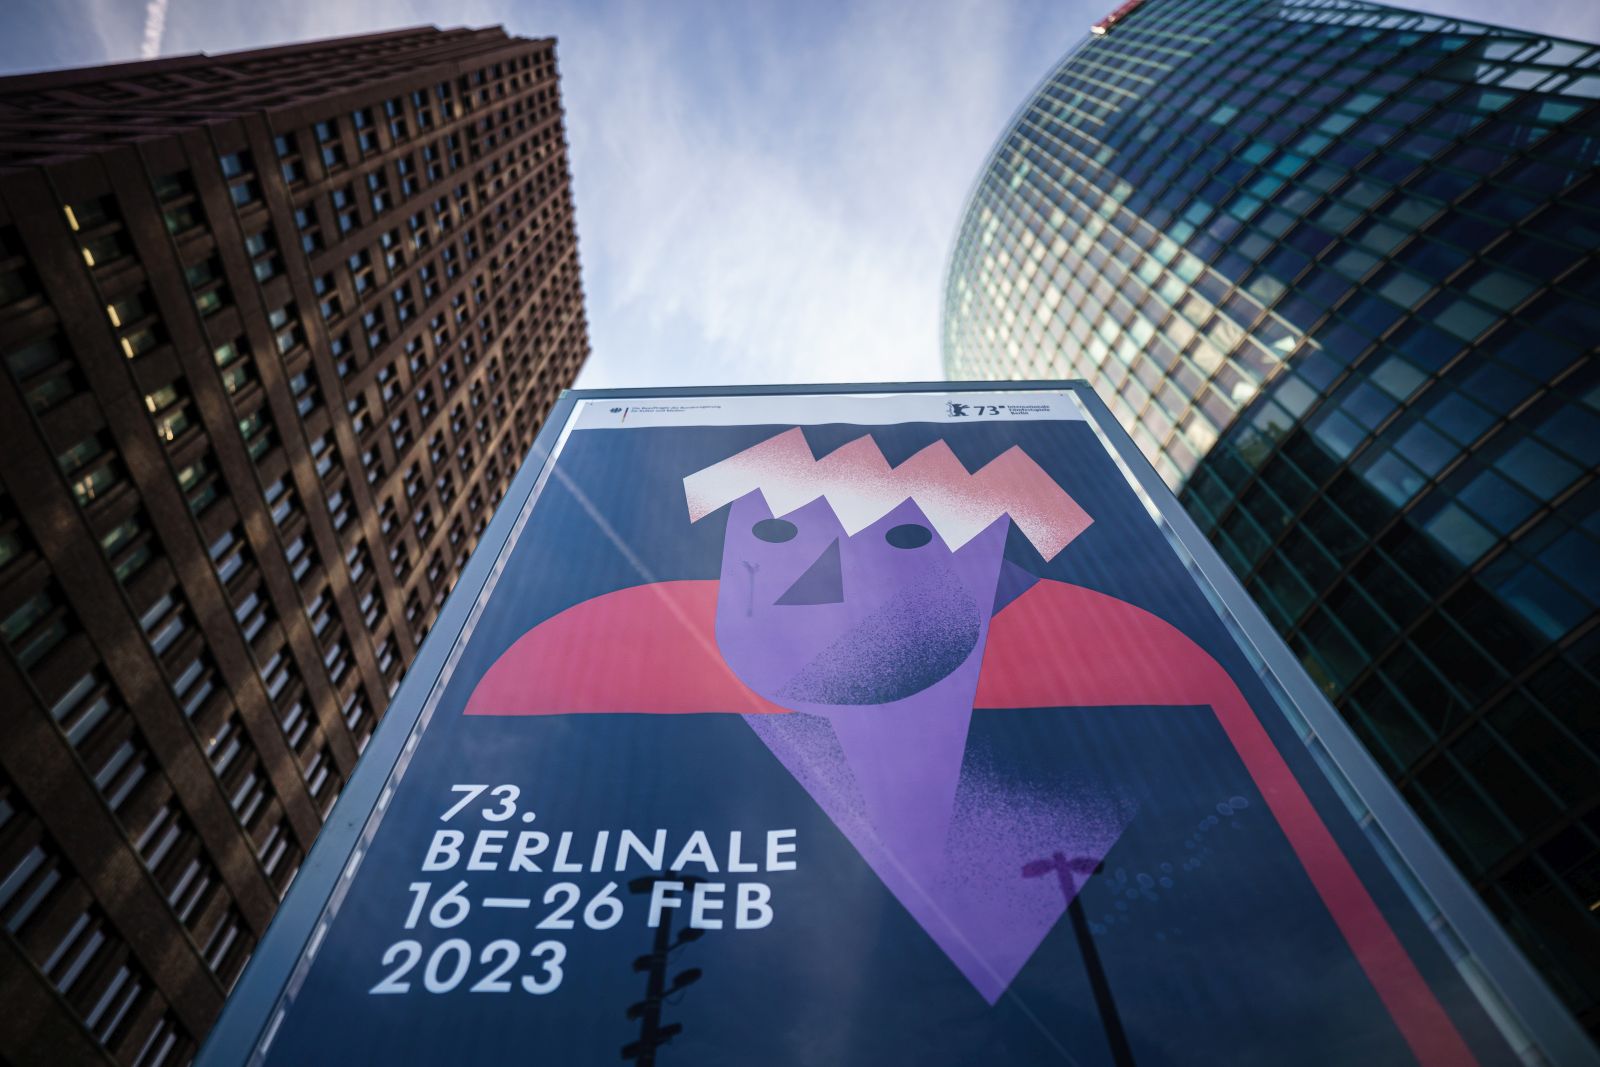 epa10468576 An advertising billboard for the upcoming 73rd Berlin International Film Festival 'Berlinale' in Berlin, Germany, 15 February 2023. The in-person event runs from 16 to 26 February 2023.  EPA/CLEMENS BILAN